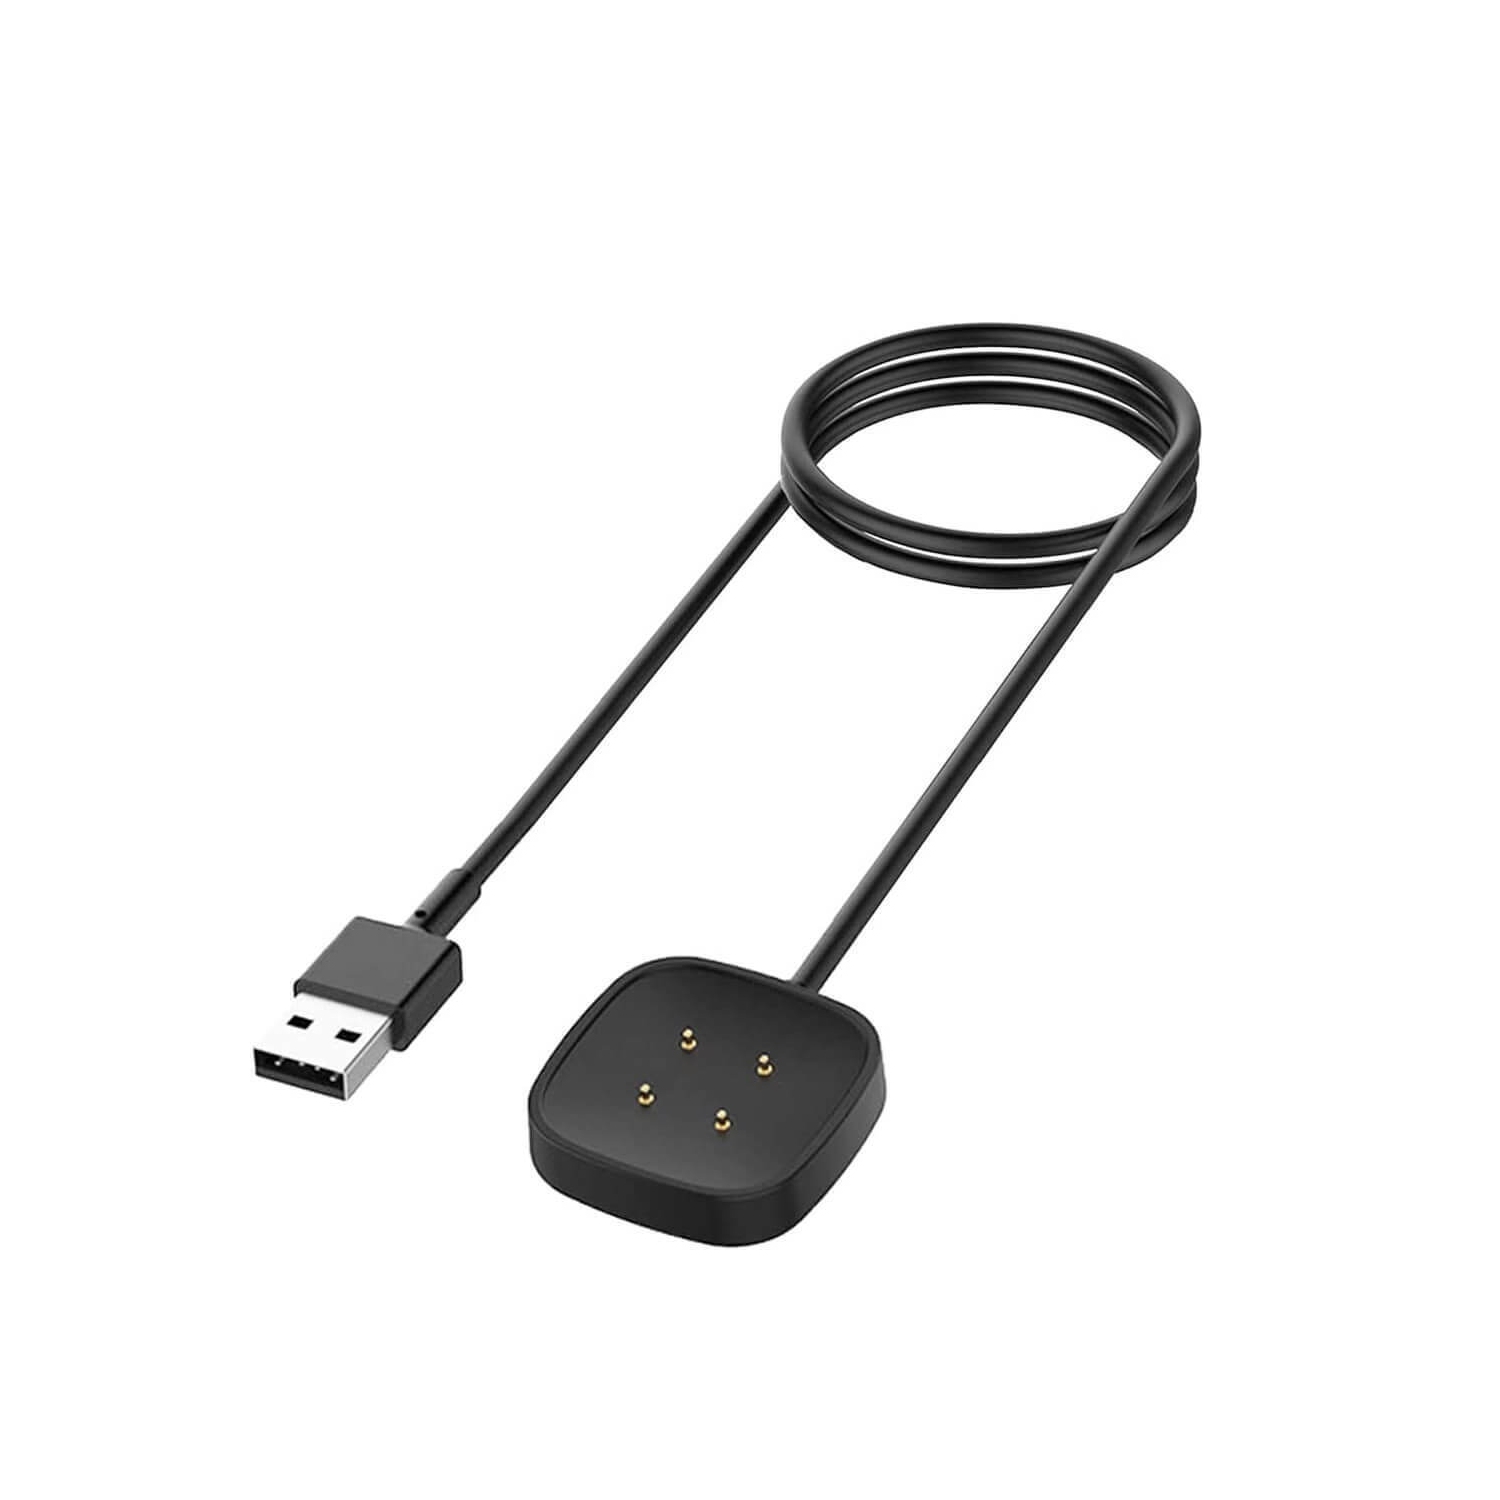 Charging Cable Compatible with Fitbit Versa 4/Versa 3/Sense 2/Sense Smartwatch, Magnetic Portable USB Charger Cable Dock Cable Cord 1M, Black